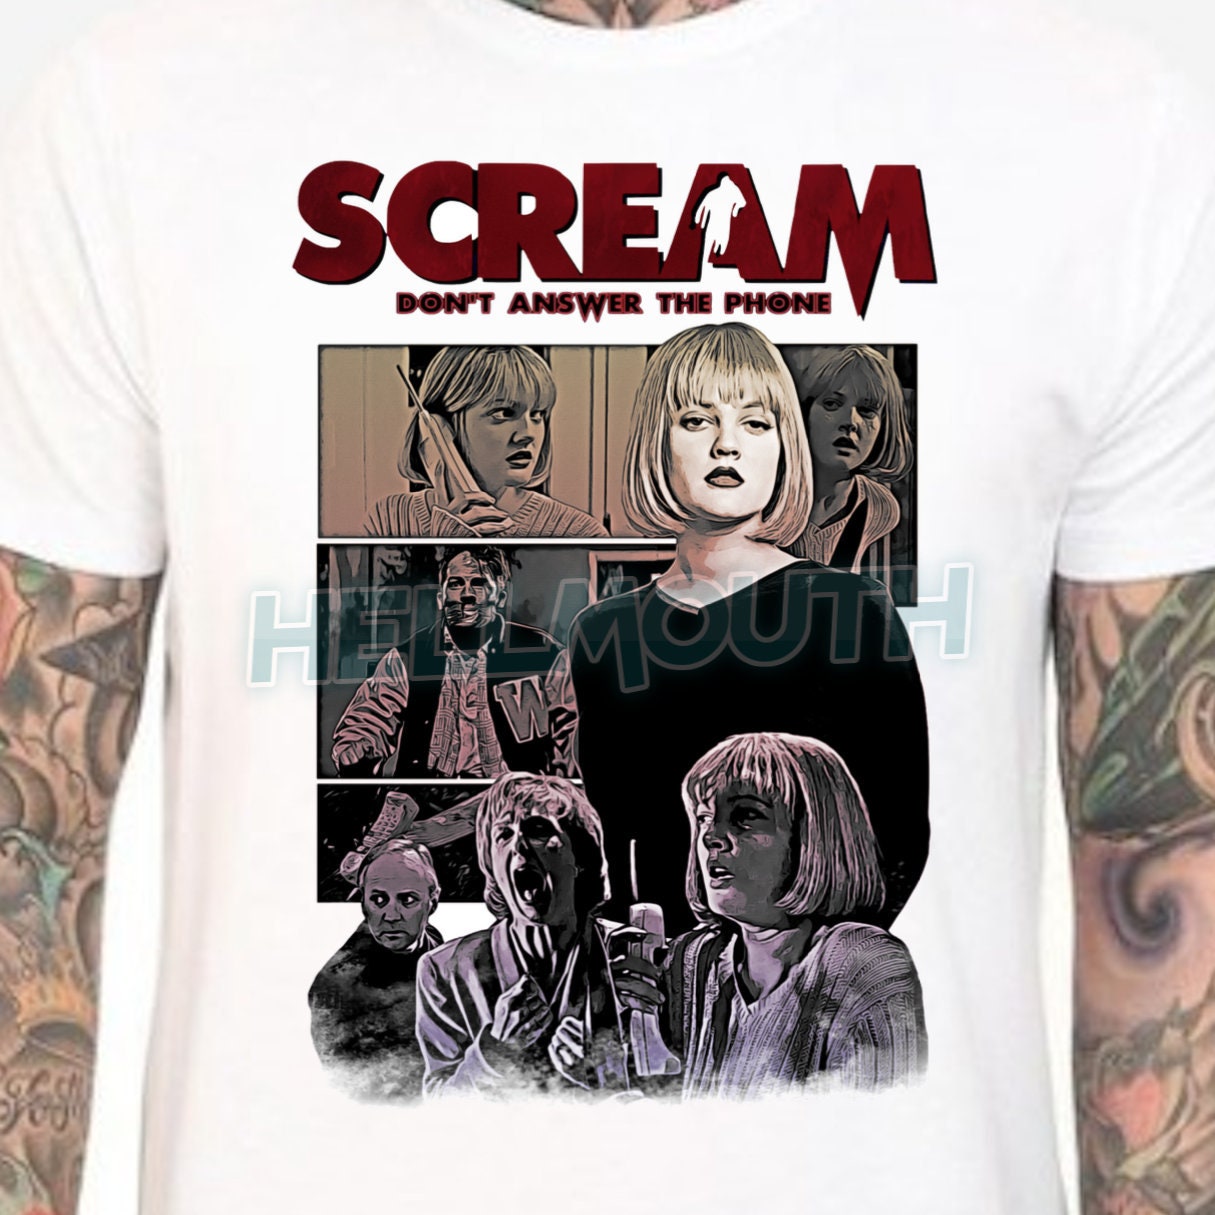 Drew Barrymore SCREAM TShirt, Let's Watch Scary Movie T-Shirt Size  S-5XL